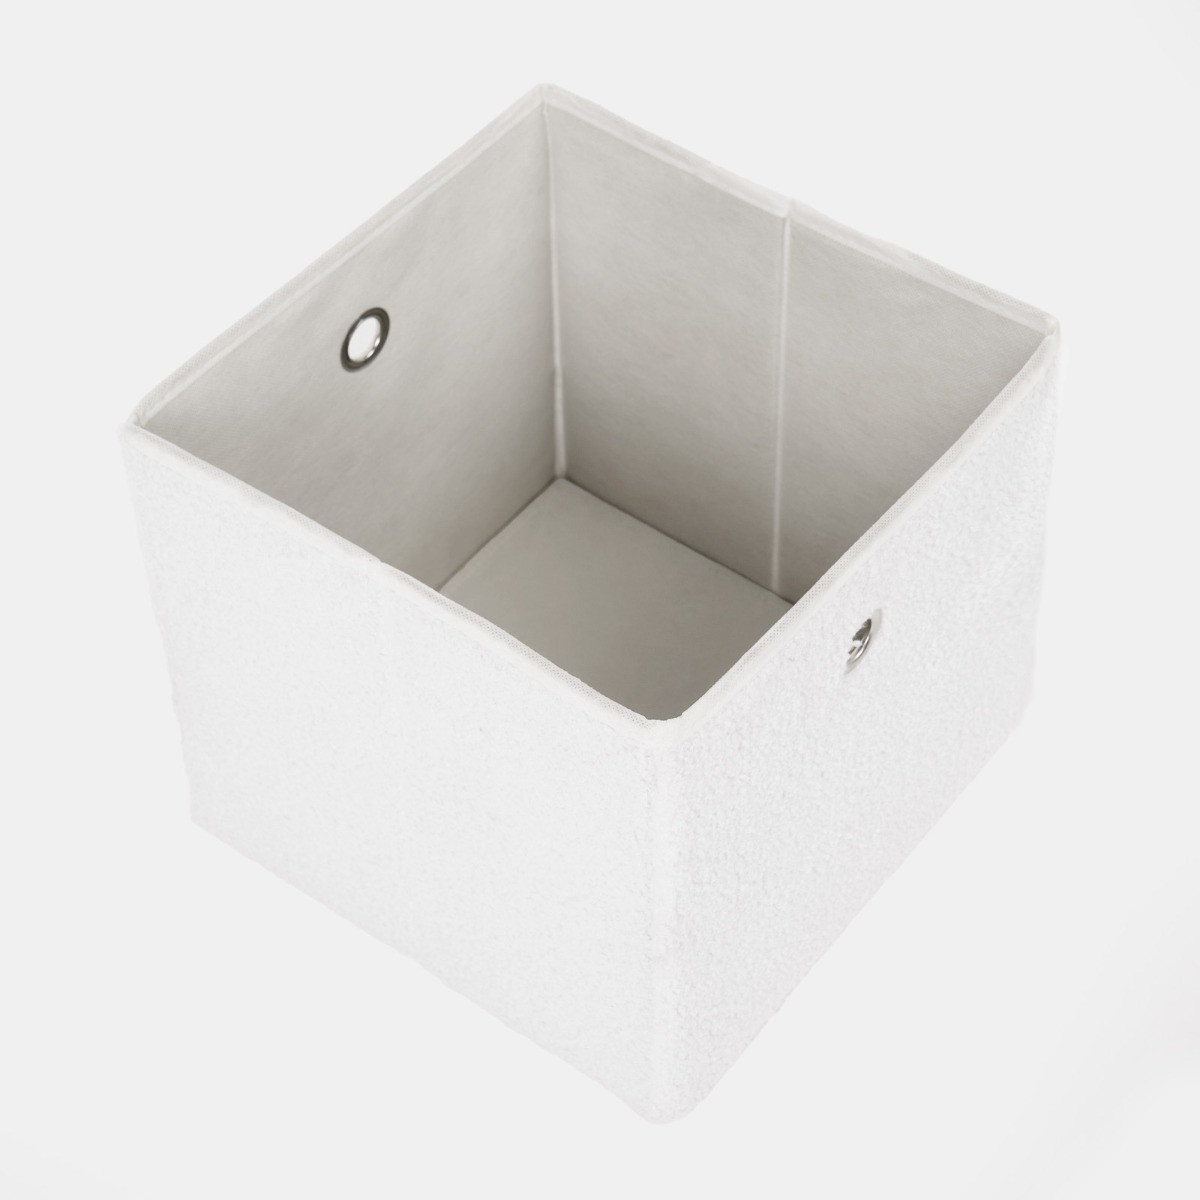 OHS Boucle Cube Storage Boxes, 2 Pack - White>